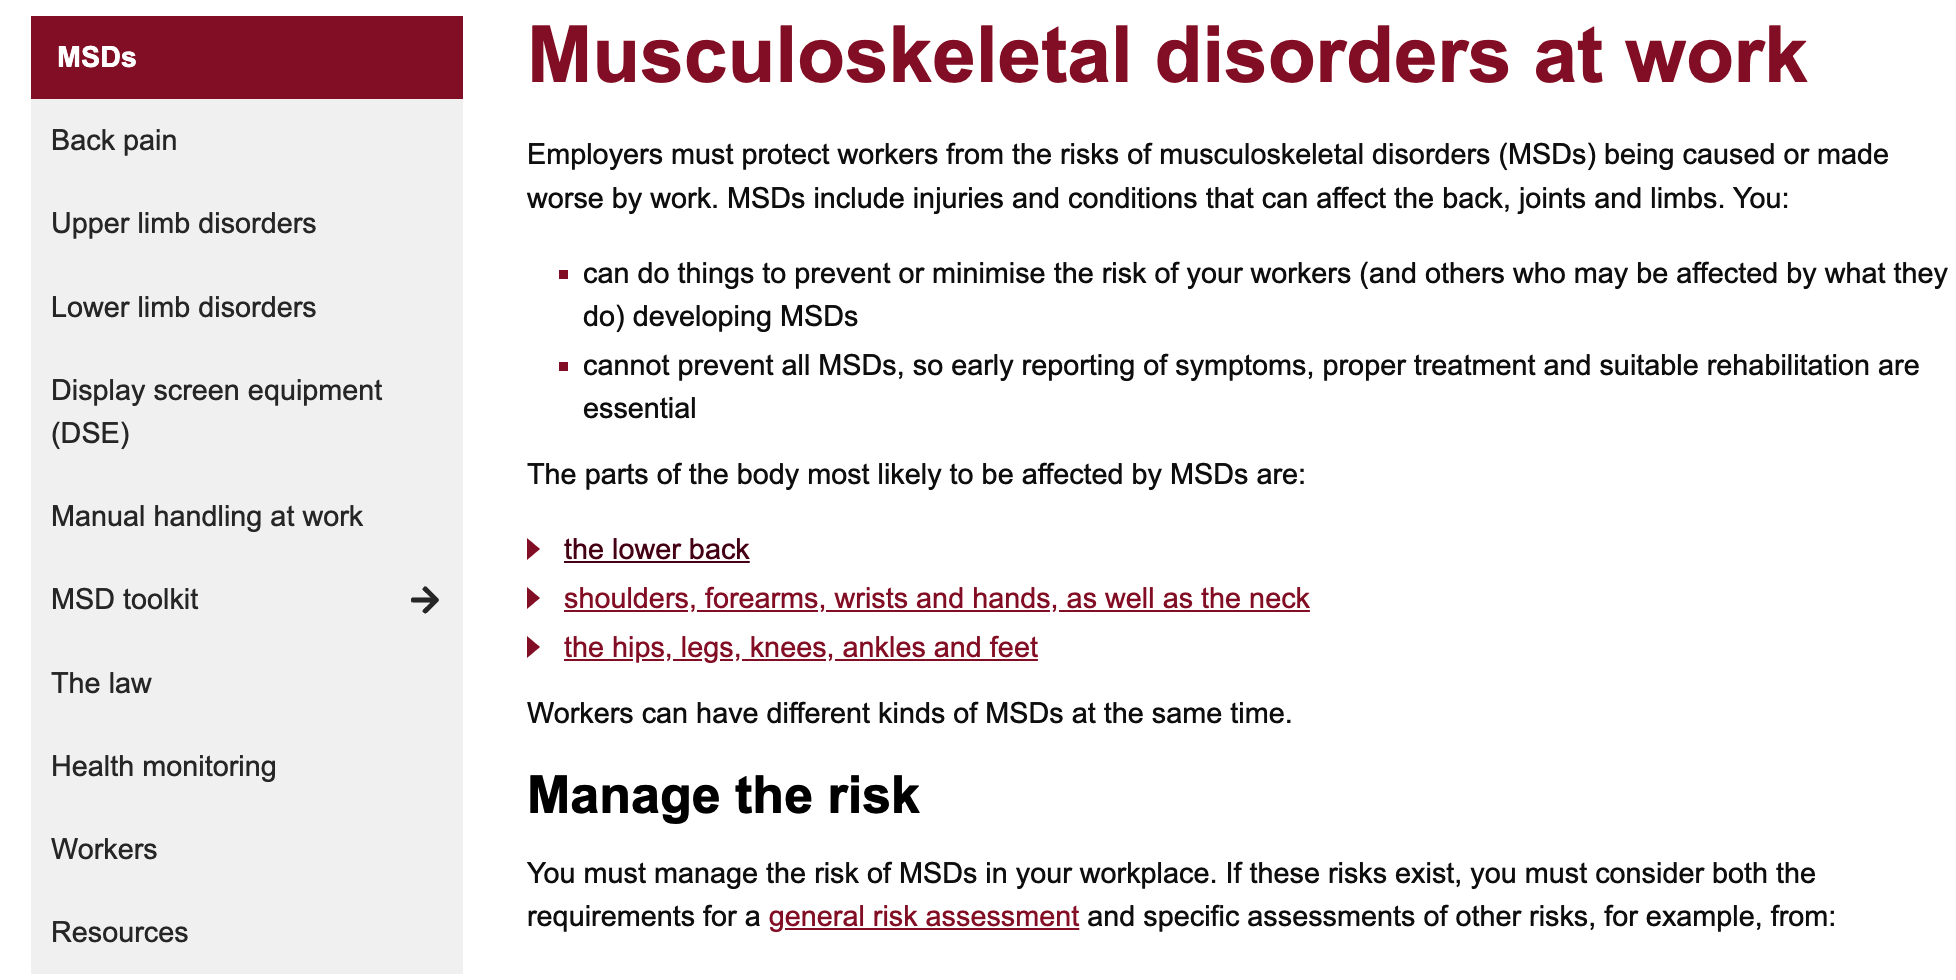 The Silent Crisis: Work-Related Musculoskeletal Disorders